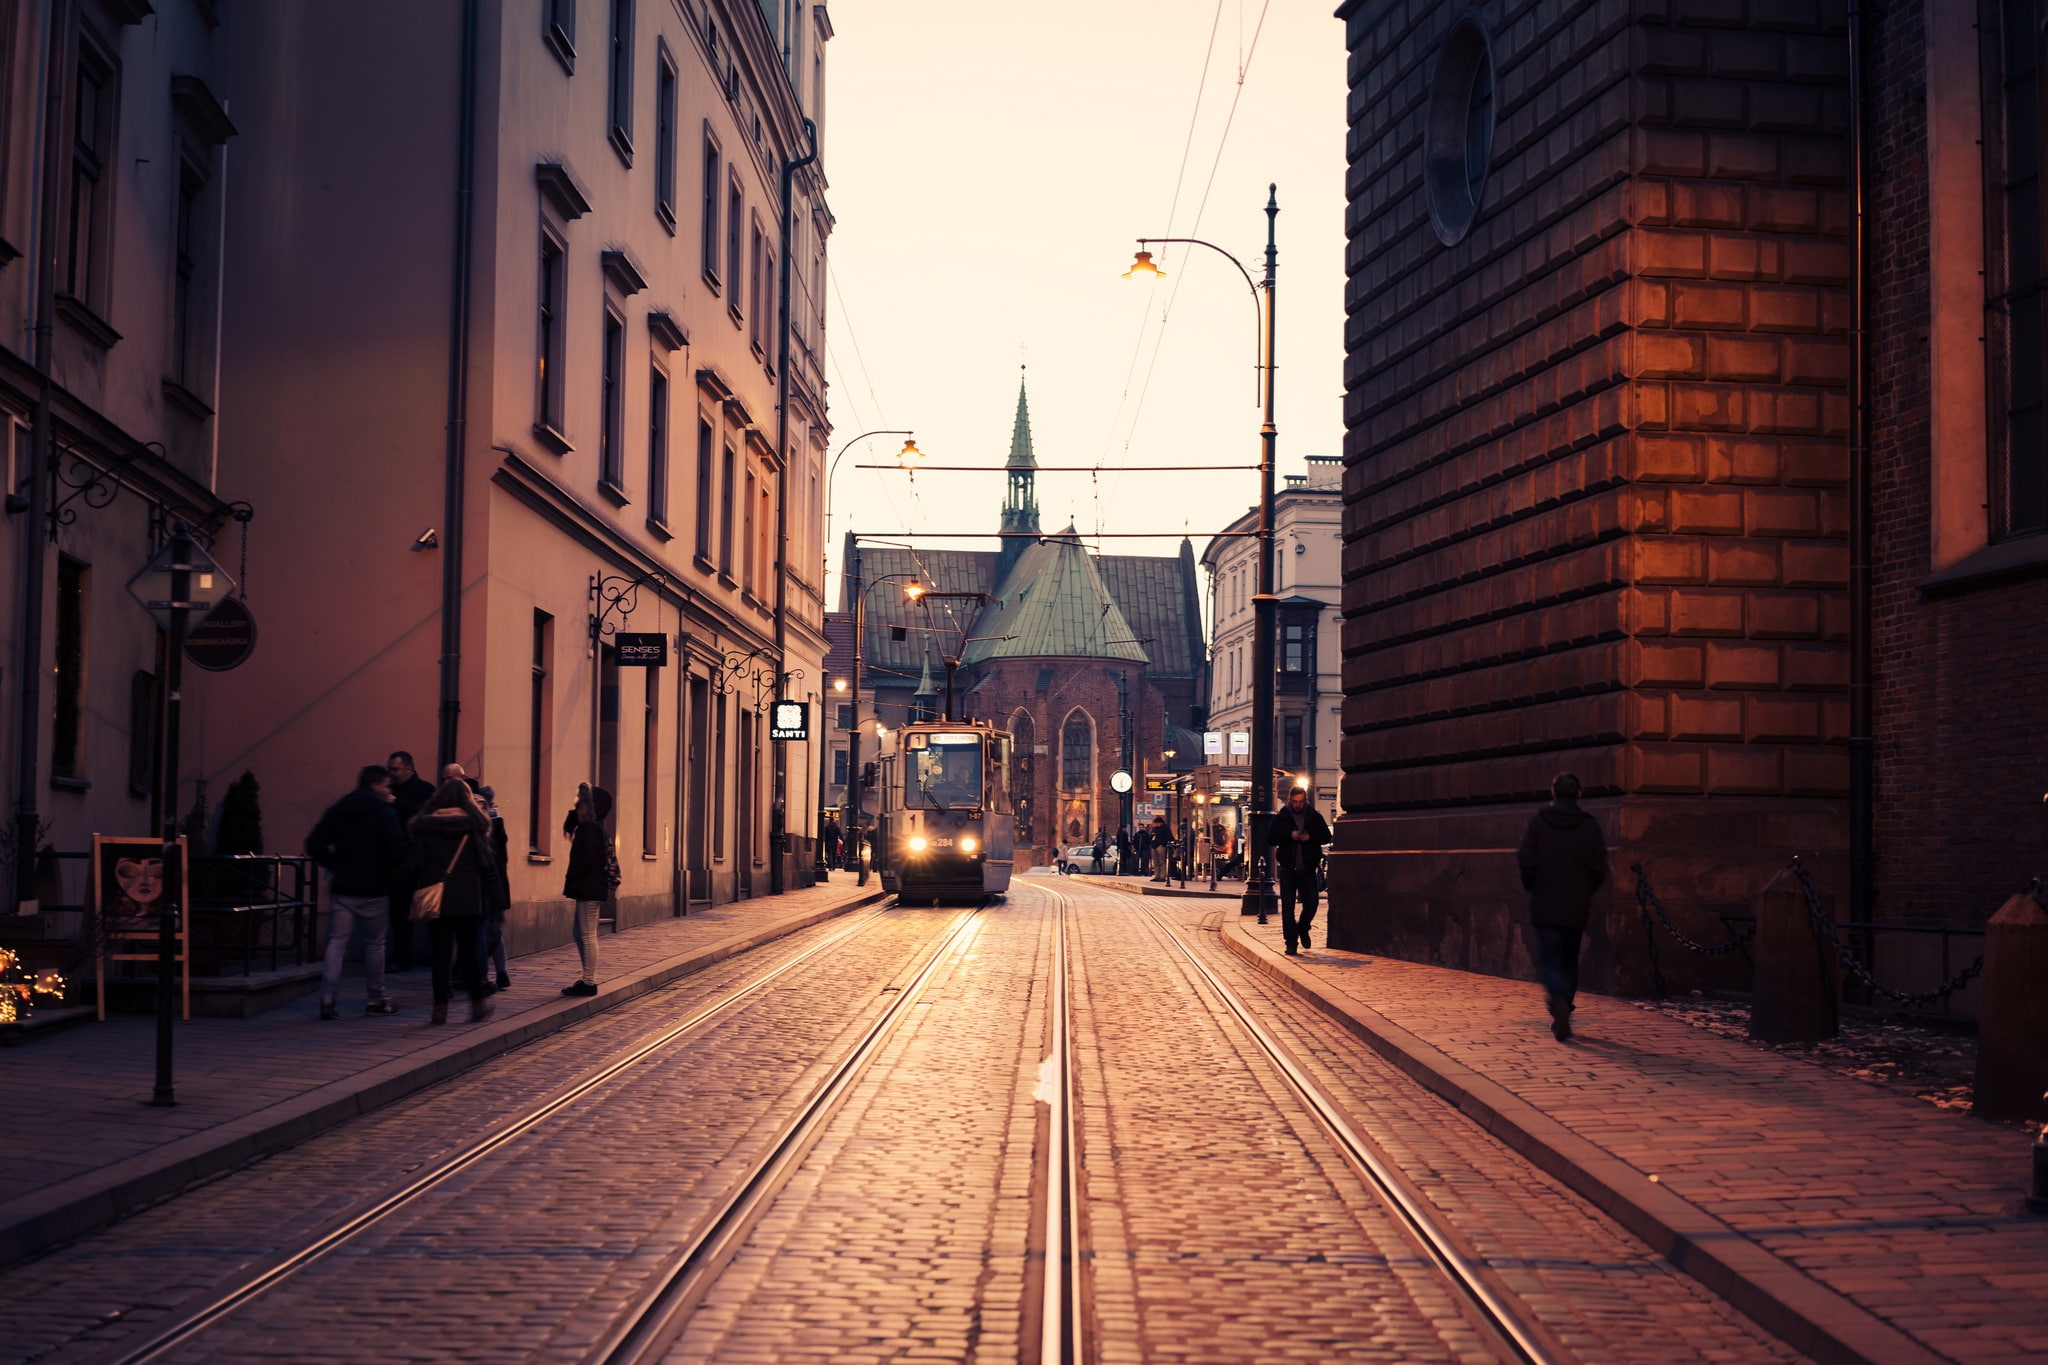 cathedral, street, people, Poland, tram, church, Krakow